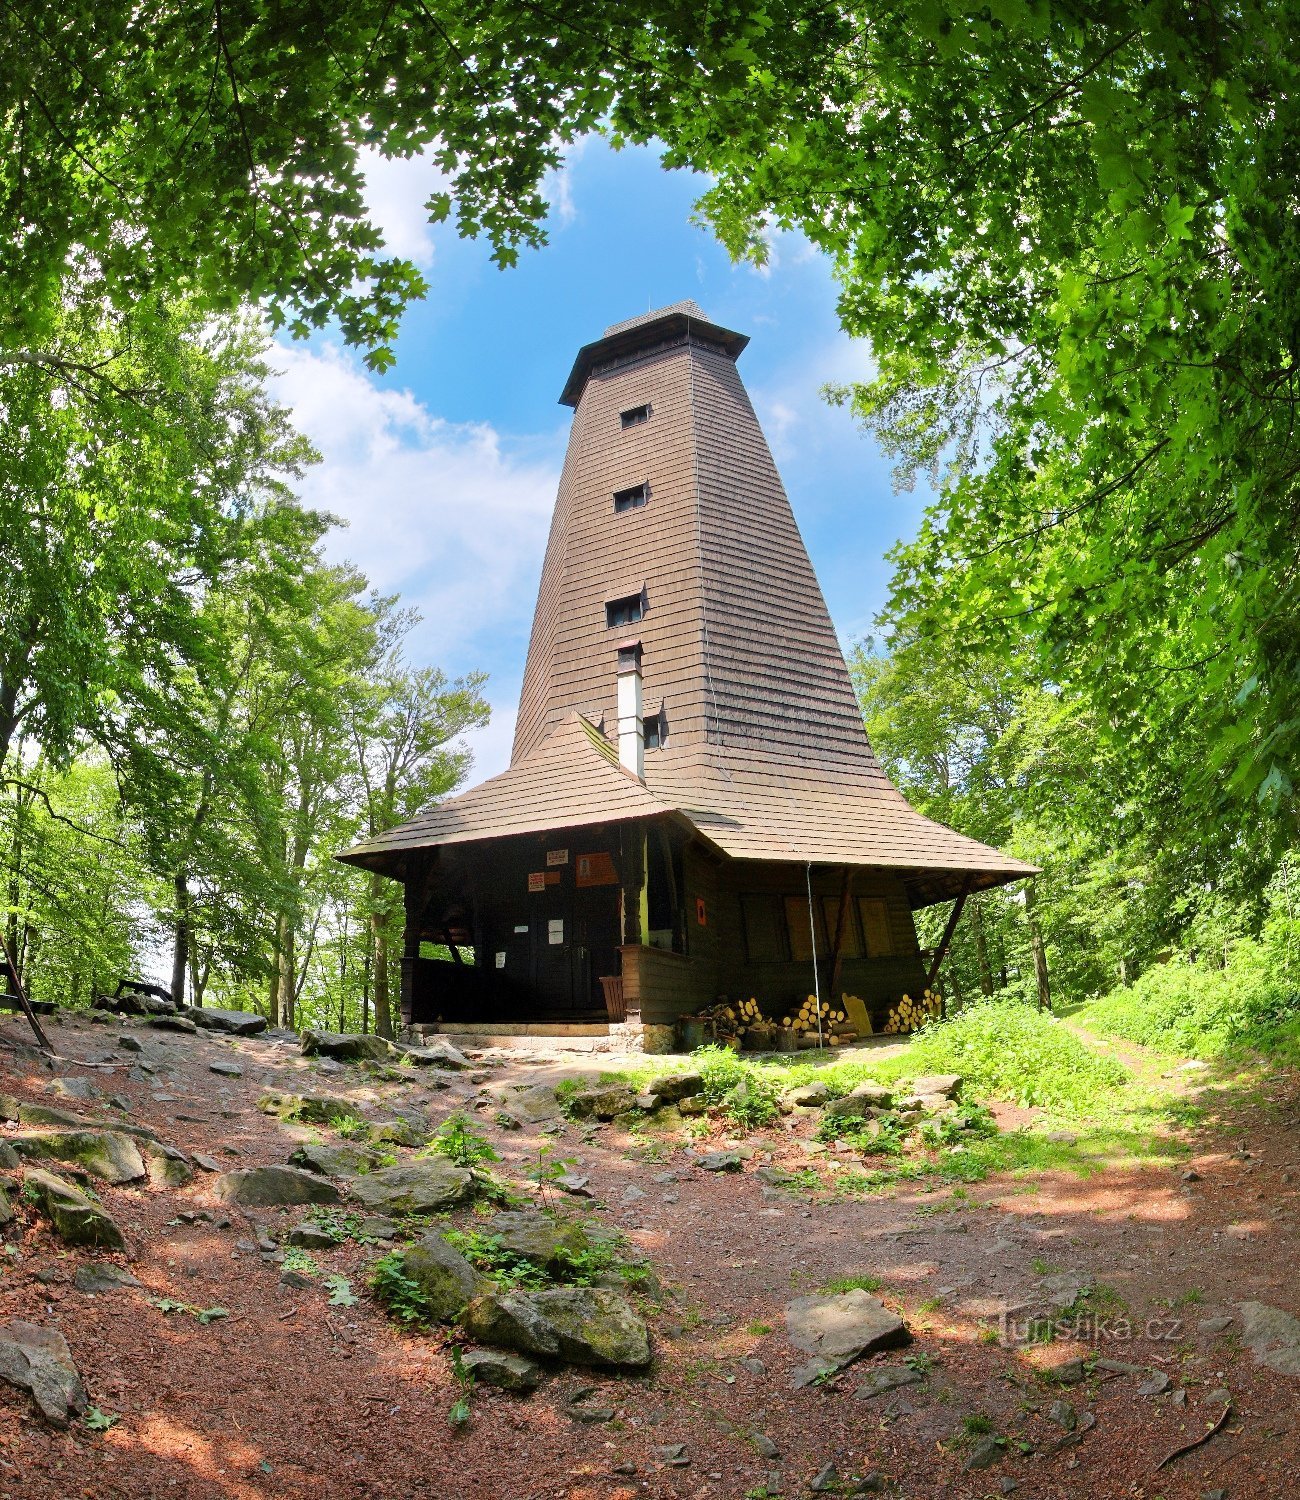 At the top of Velké Blaník, you will be rewarded with a lookout tower.